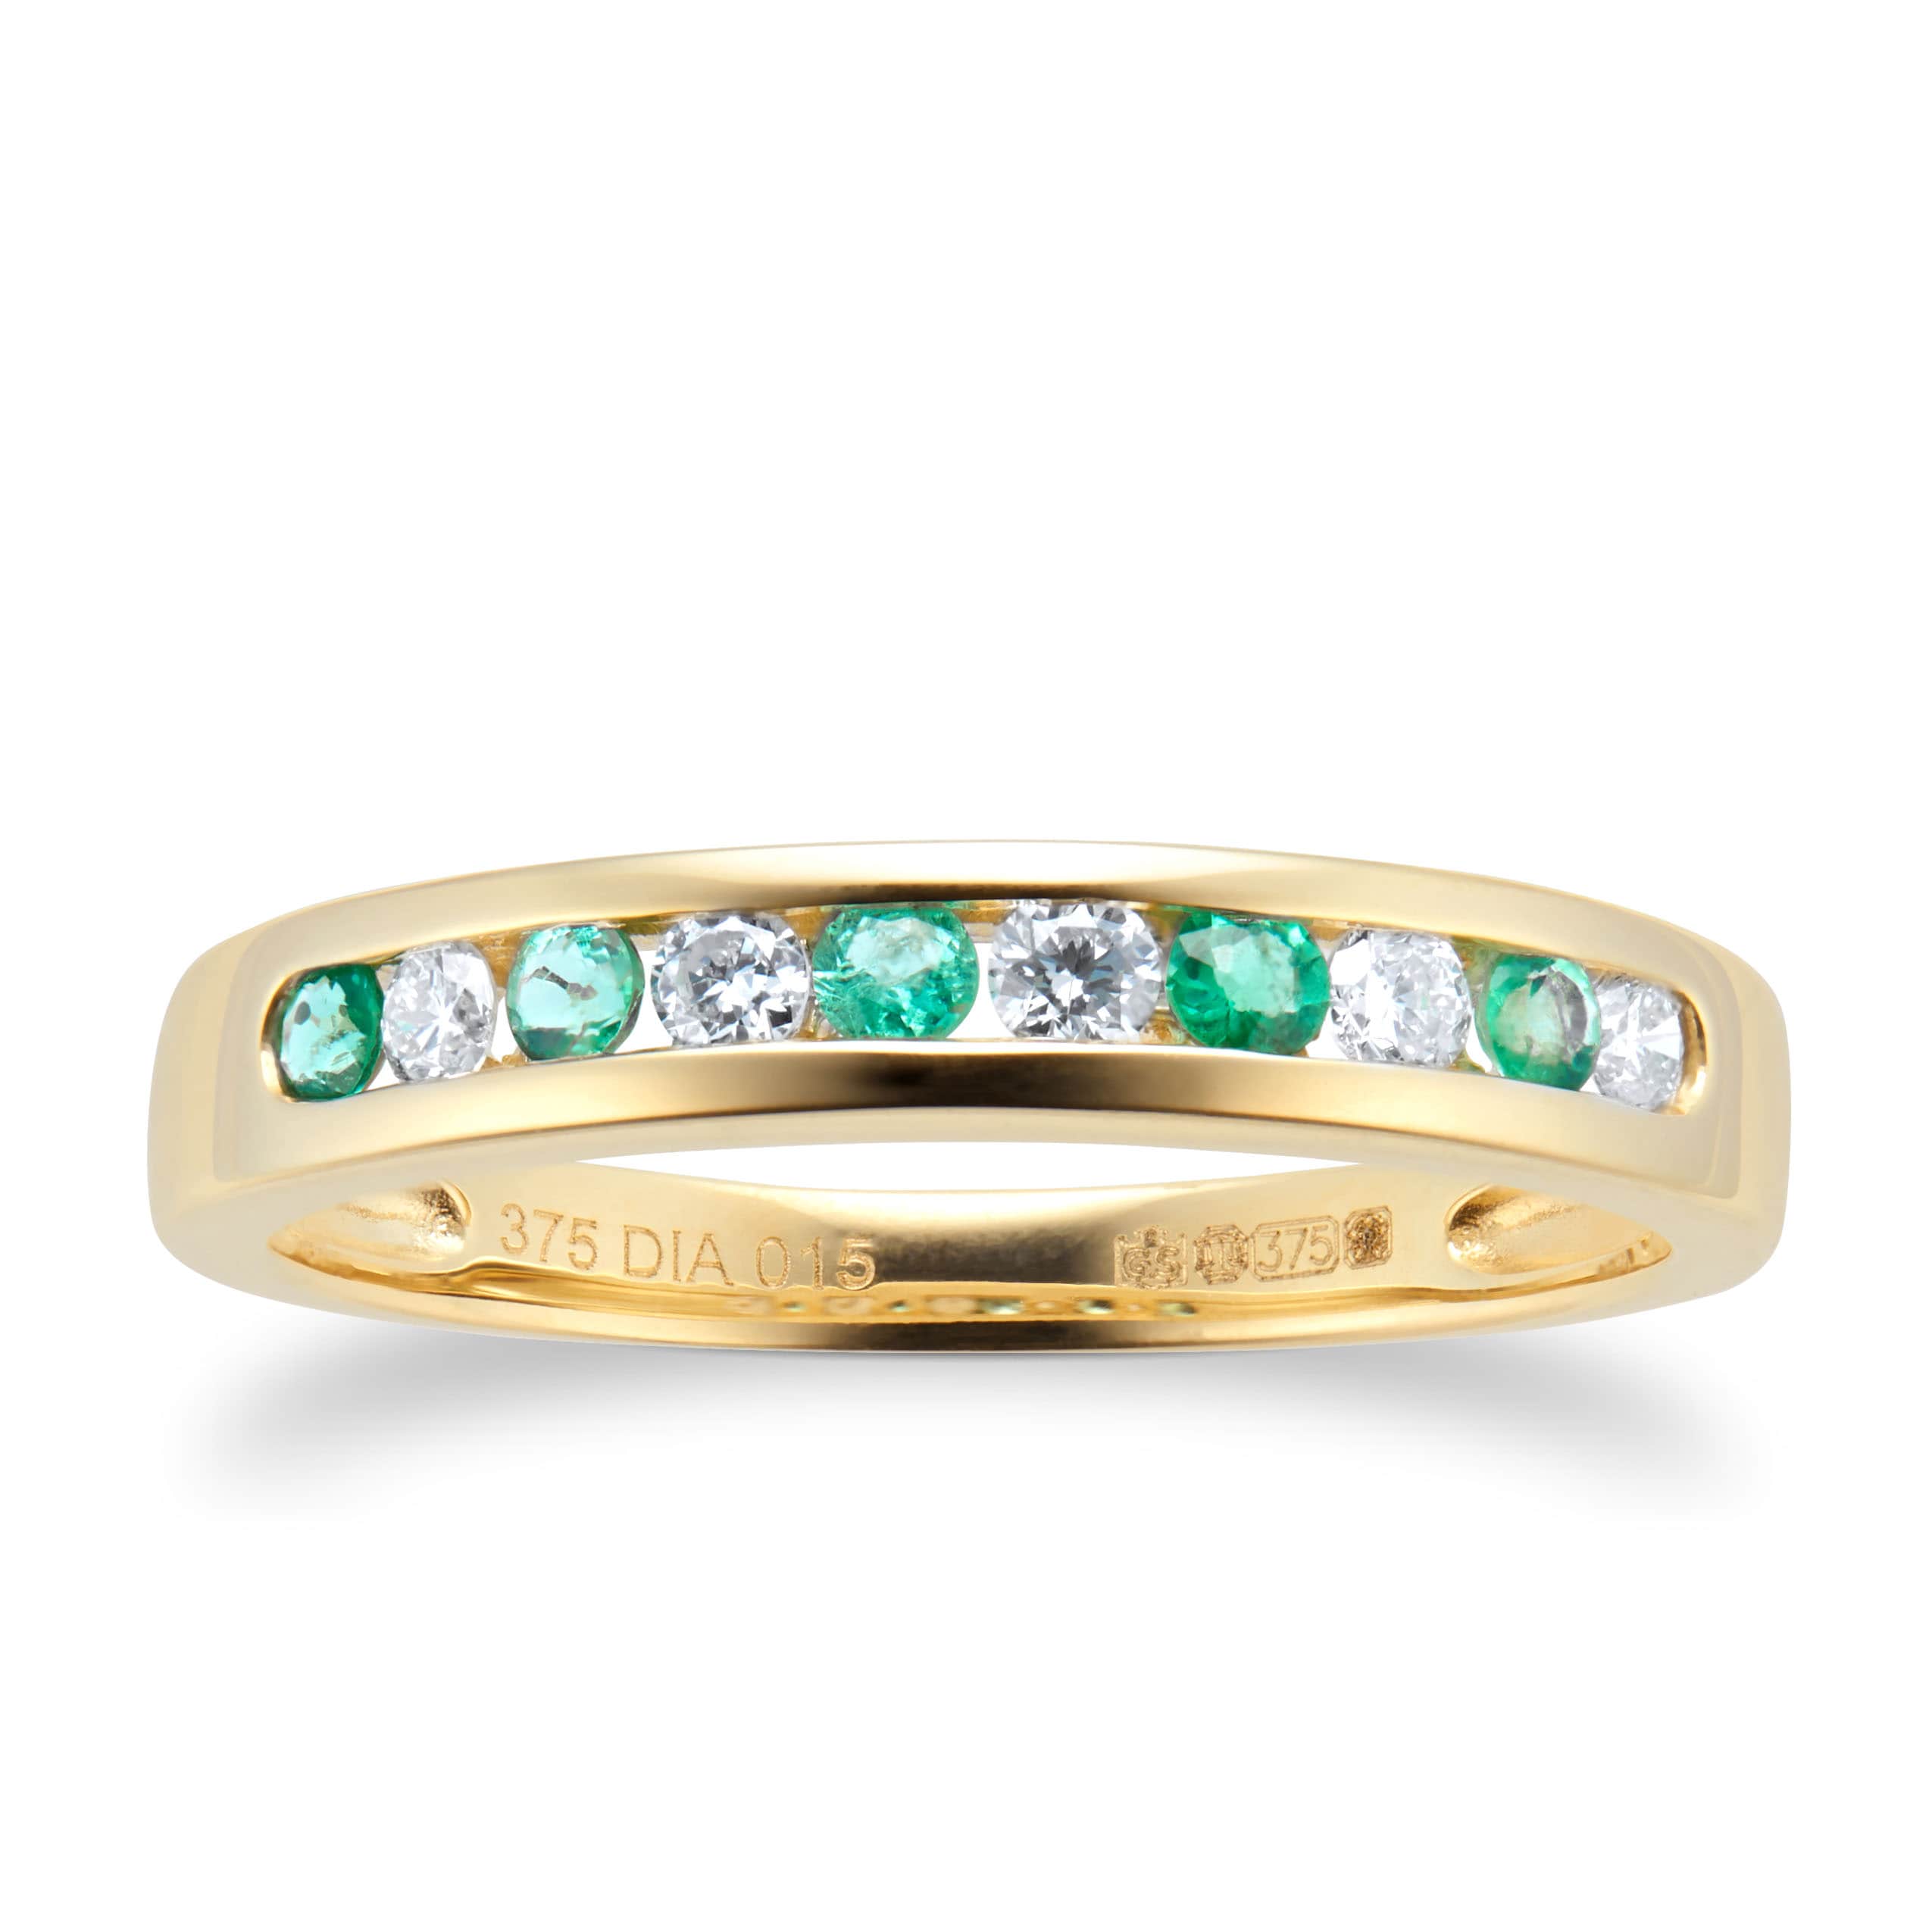 Brilliant Cut Emerald And Diamond Eternity Ring In 9 Carat Yellow Gold - Ring Size P